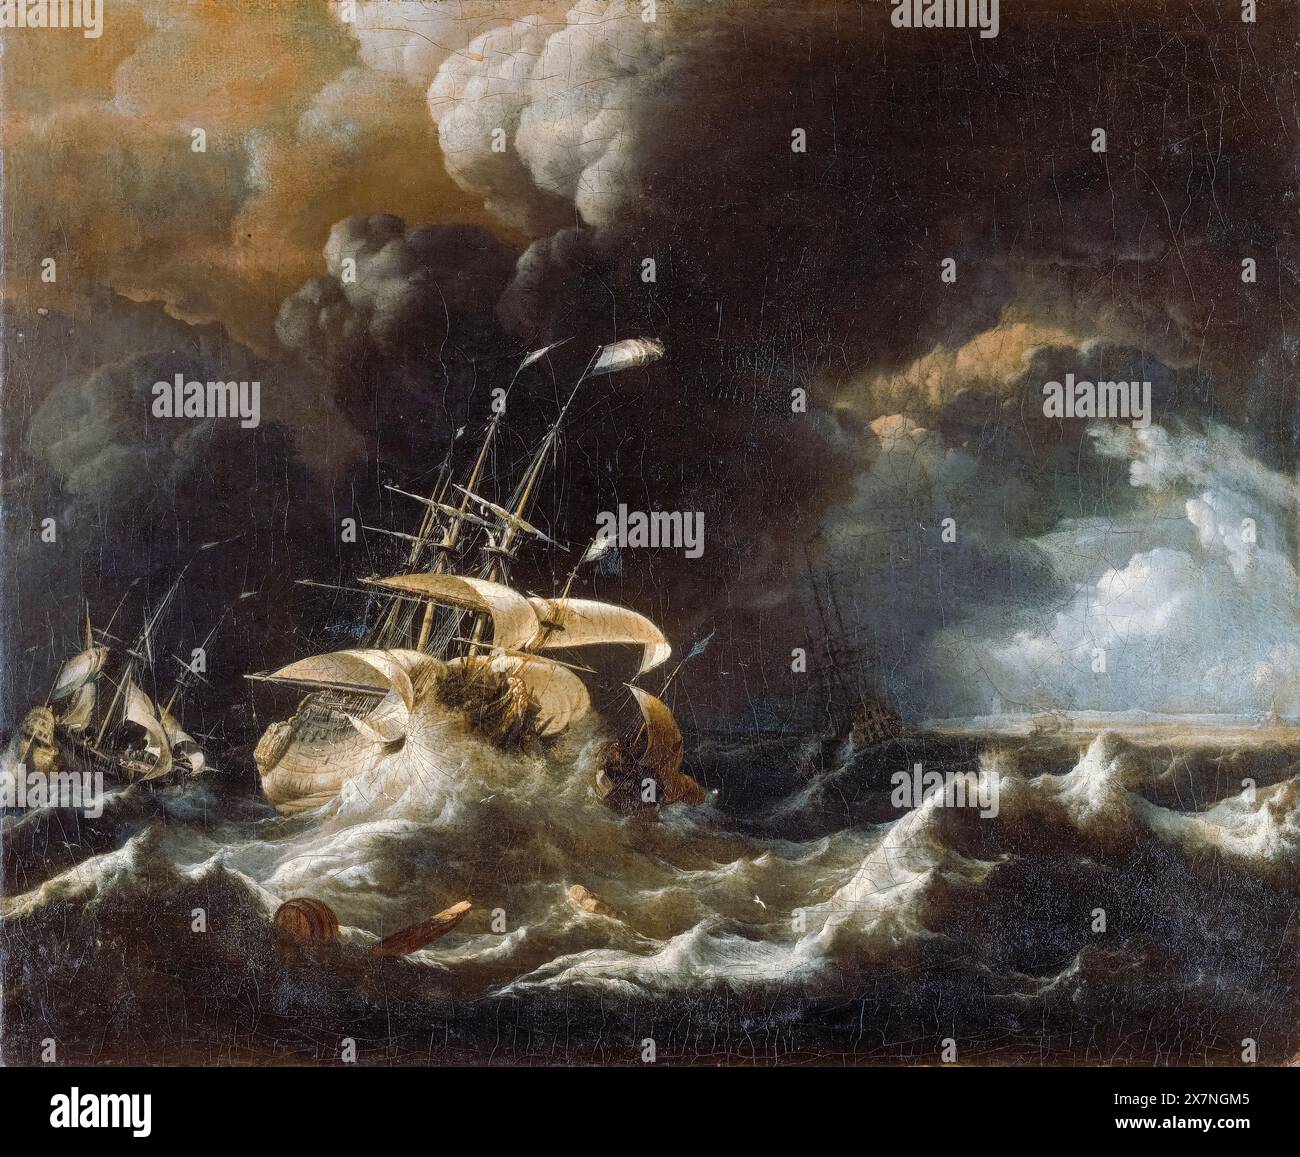 Ludolf Bakhuizen, Dutch Merchant Ships in a Storm, painting in oil on canvas, 1670-1699 Stock Photo